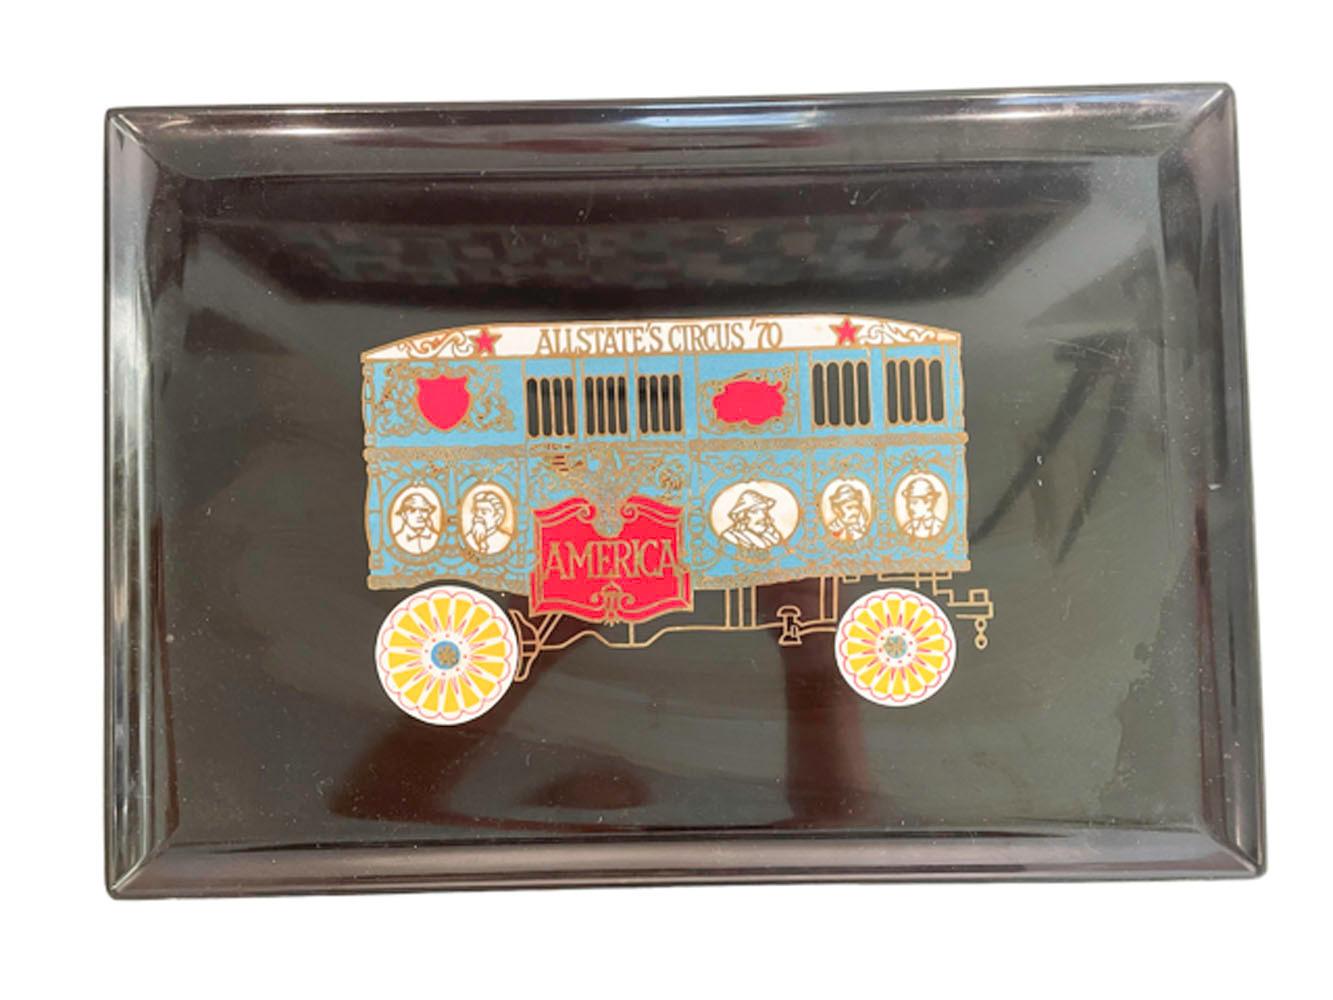 Vintage mid-century modern rectangular serving tray made of black phenolic resin, inlaid with brass and colored resins. This tray depicts a brightly colored c.1900 image of a circus train. Phenolic resin has properties which make it resistant to